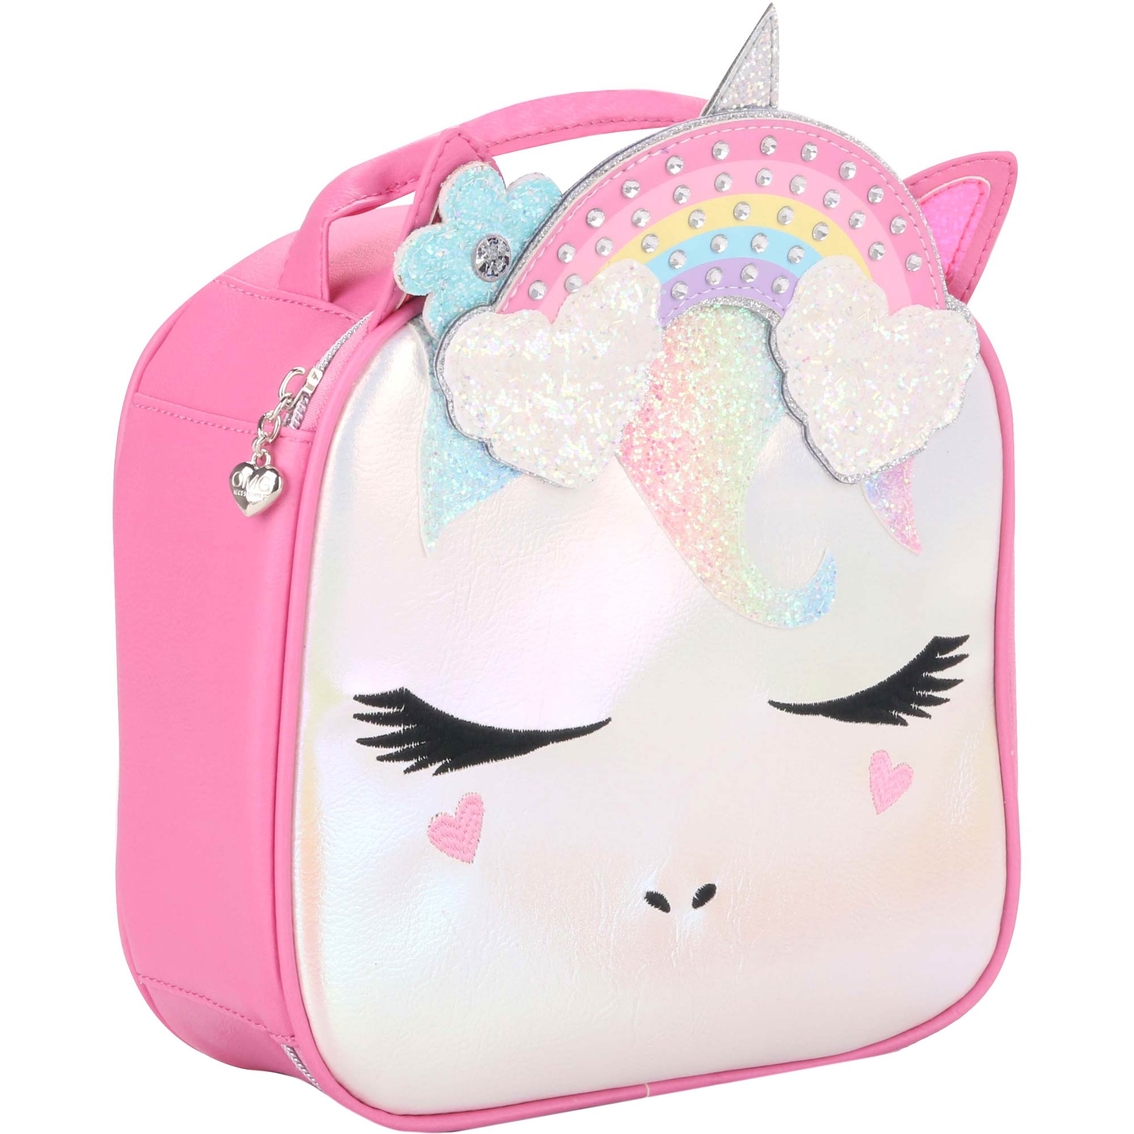 OMG Accessories Miss Gwen Unicorn Lunch Bag - Image 2 of 2